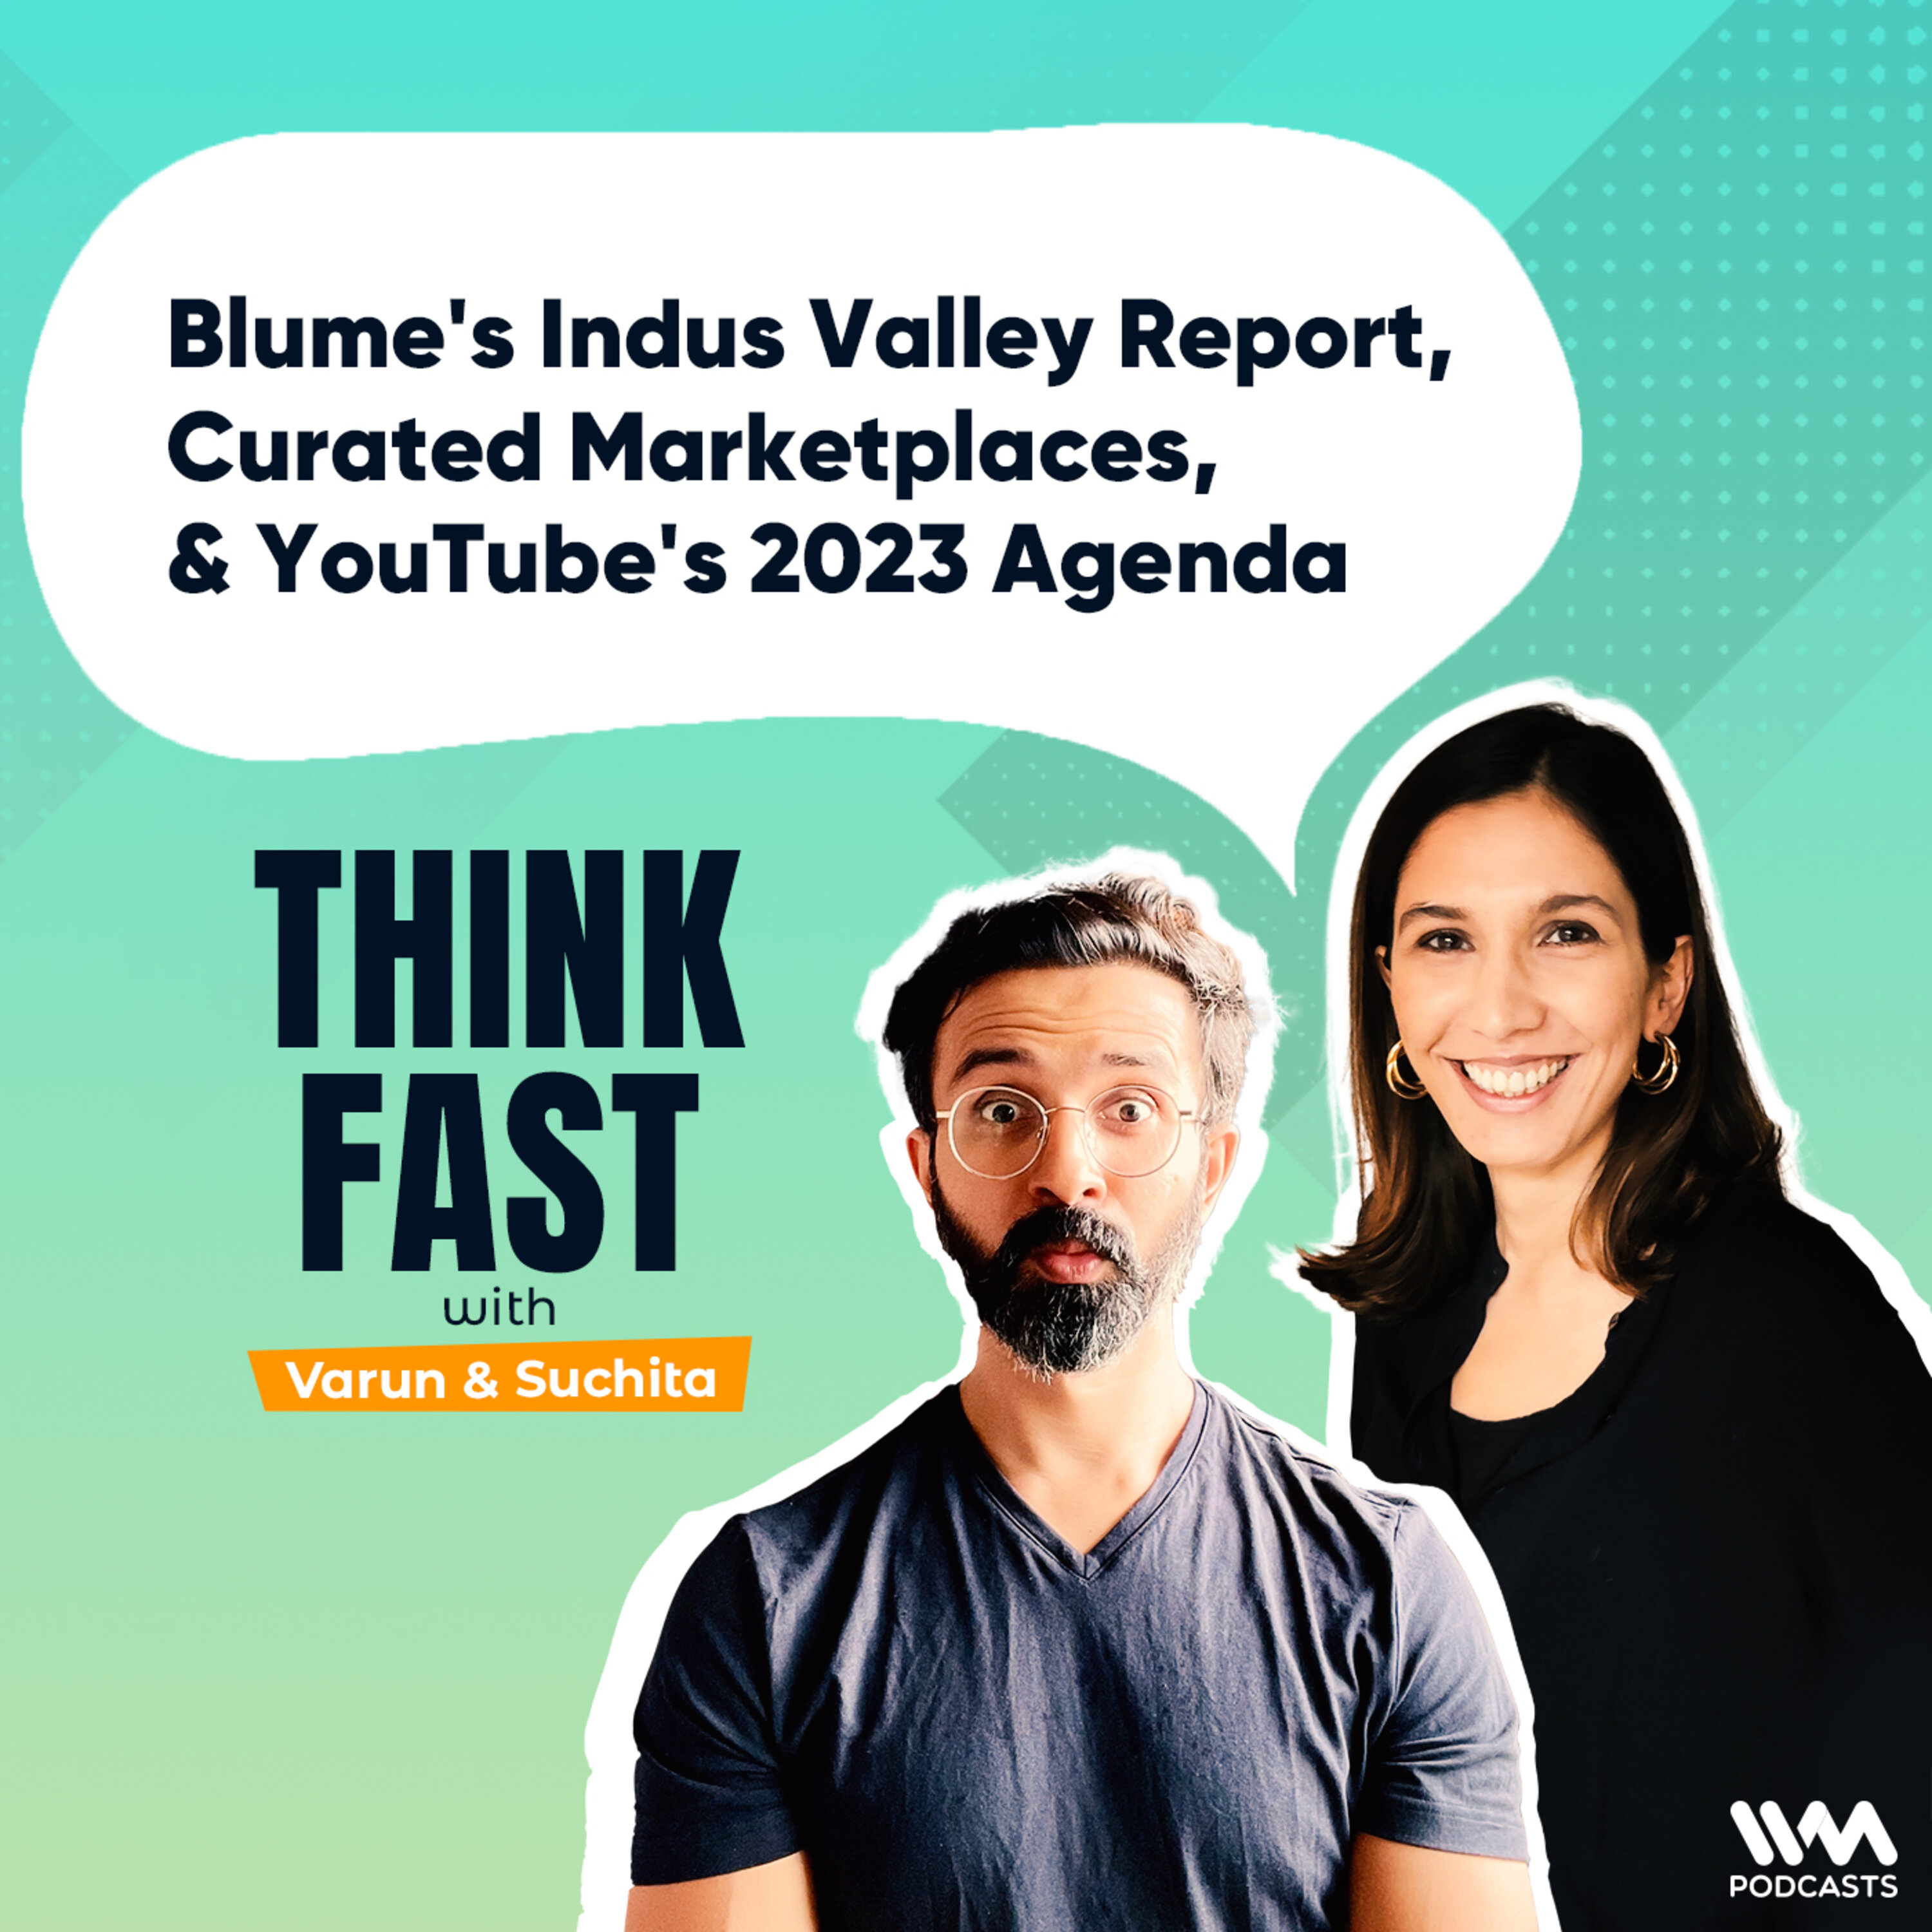 Blume's Indus Valley Report, Curated Marketplaces, & YouTube's 2023 Agenda